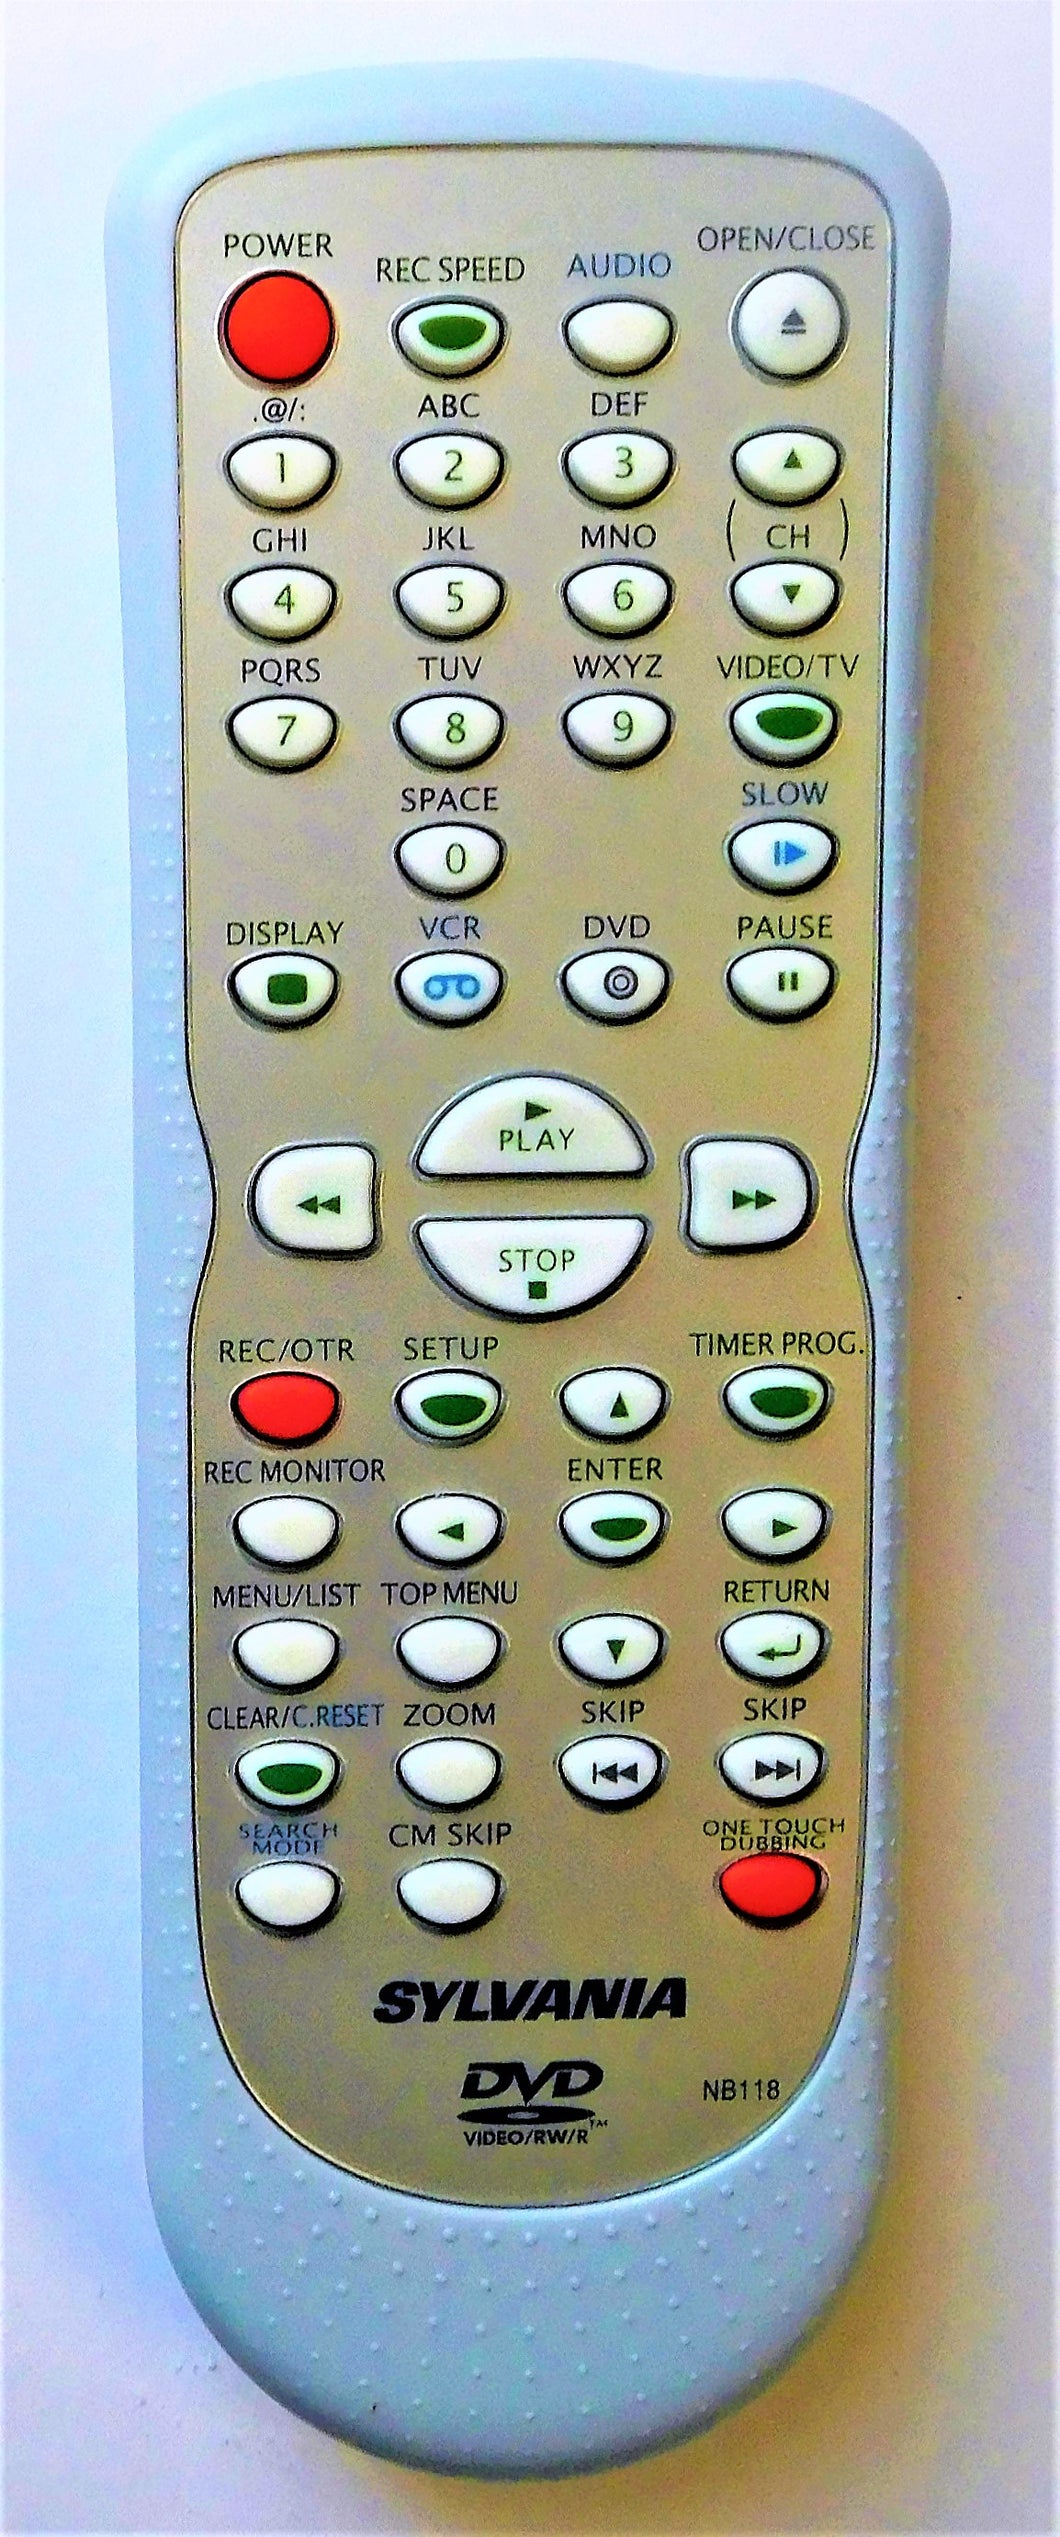 OEM replacement remote control for Sylvania DVD & VCR COMBOS NB118UD